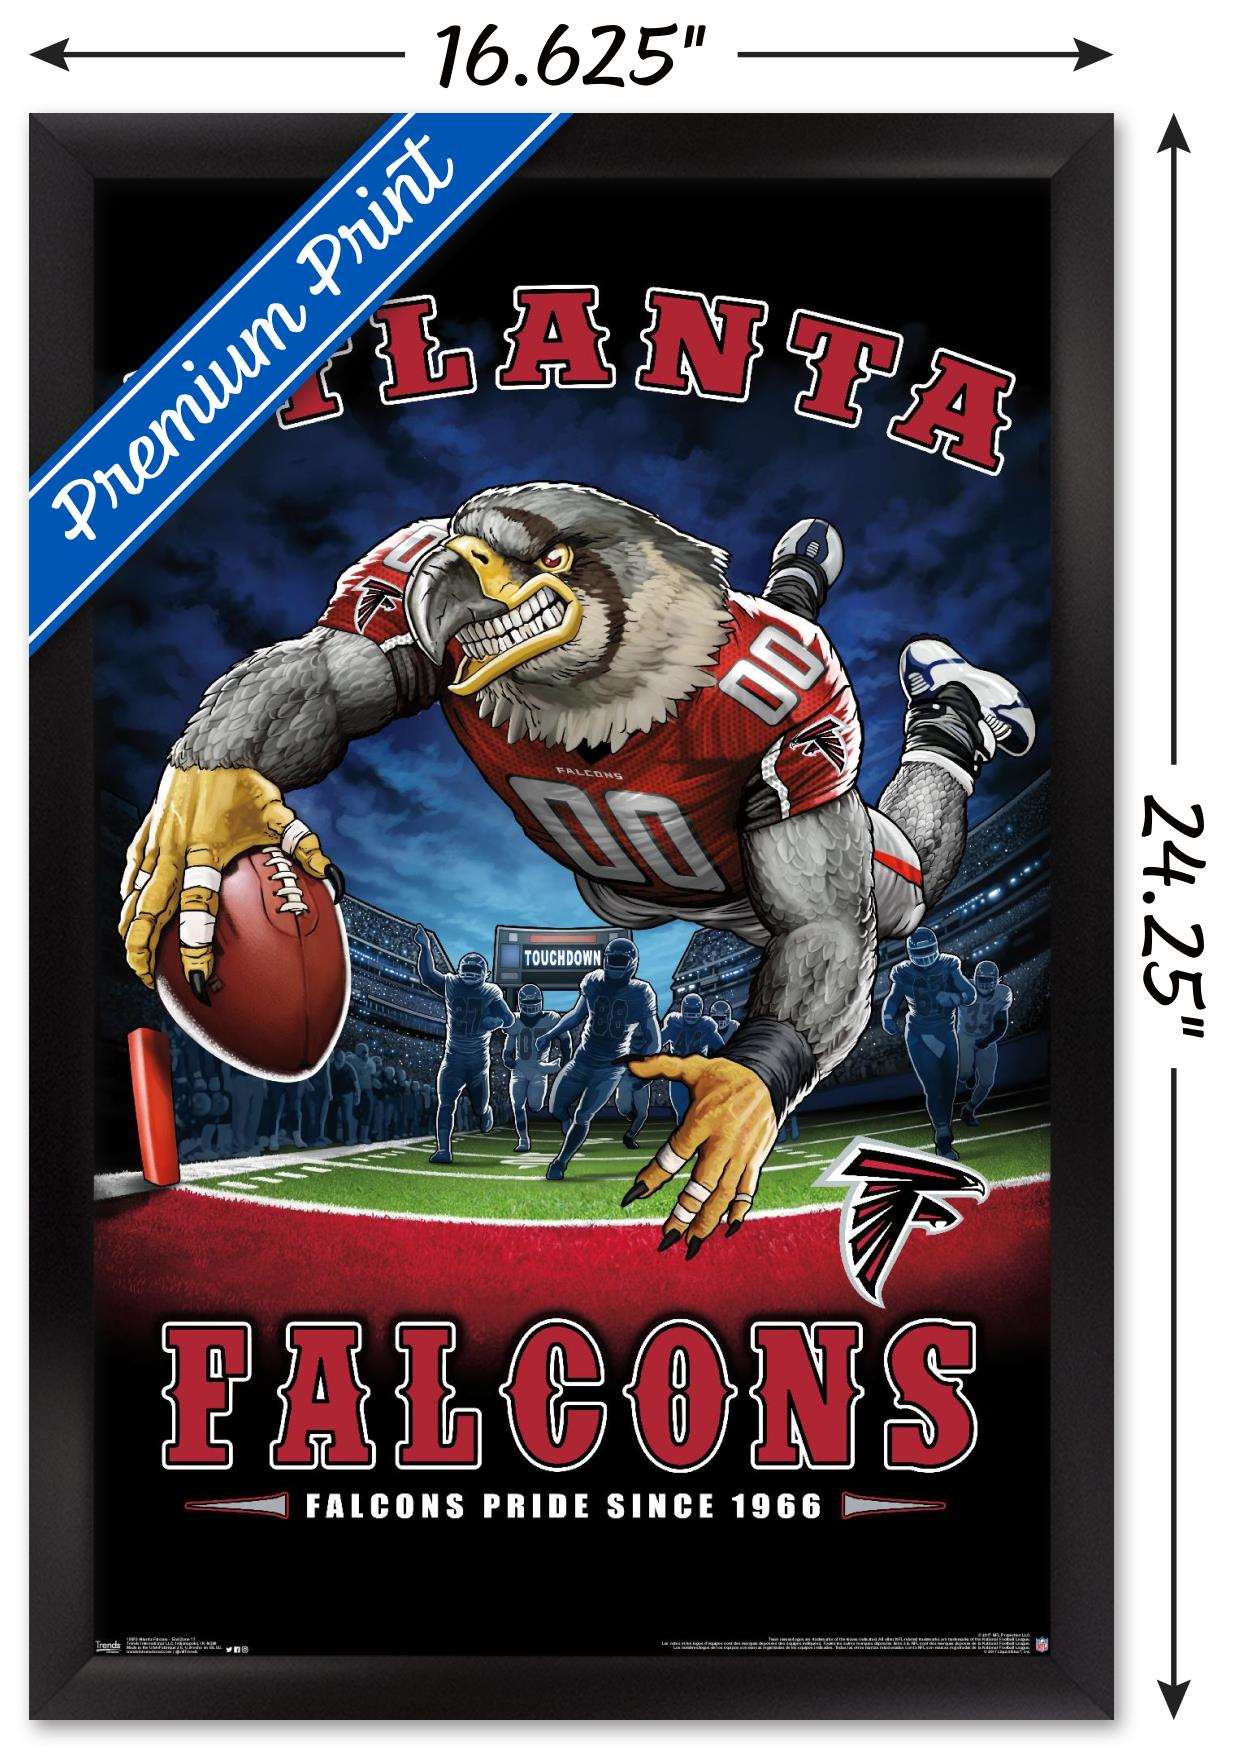 NFL Atlanta Falcons - End Zone 17 Wall Poster, 14.725" x 22.375", Framed - image 3 of 5